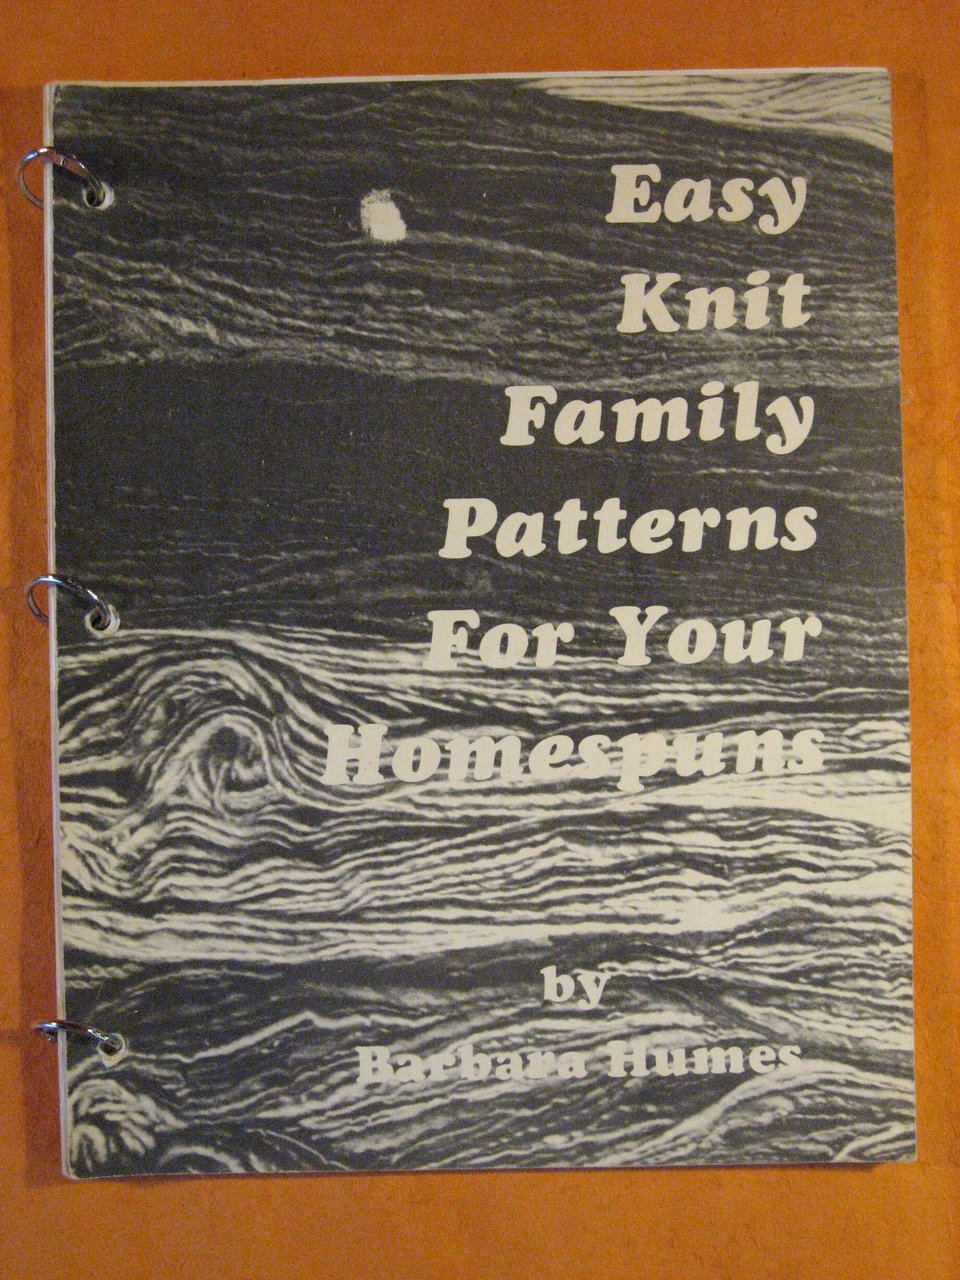 Easy Knit Family Patterns for Your Homespuns